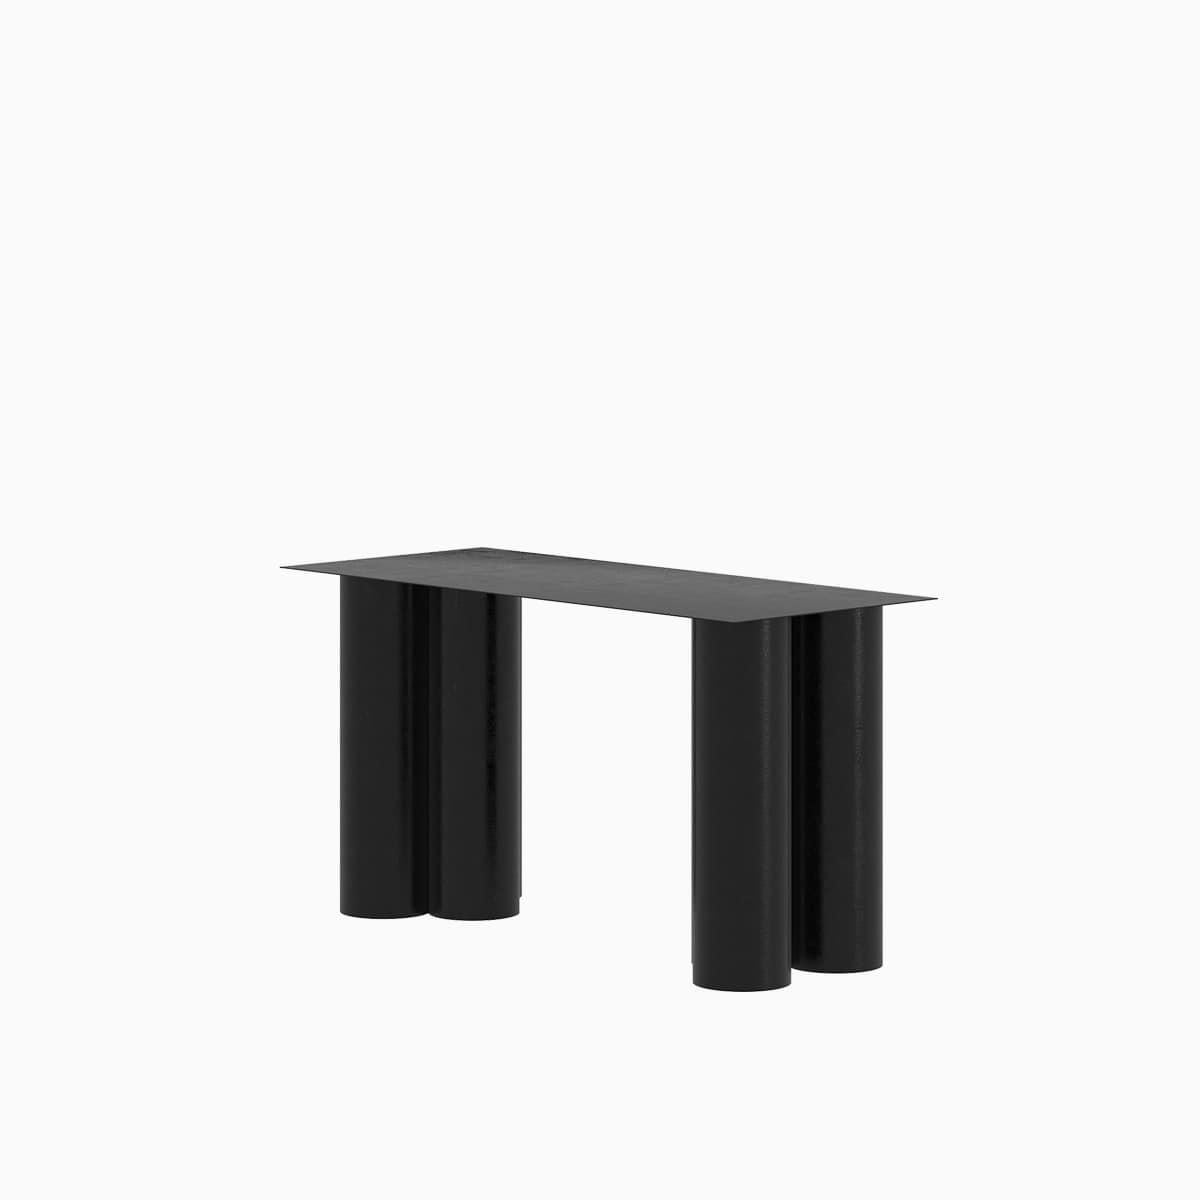 Conceptualized in 2023 by Leonardo Floresvillar, and crafted by hand with galvanized aluminum, coated with matte powder coating. 
The Chunky Desk  was designed with two surface heights to work comfortably on a computer at your studio or at your home